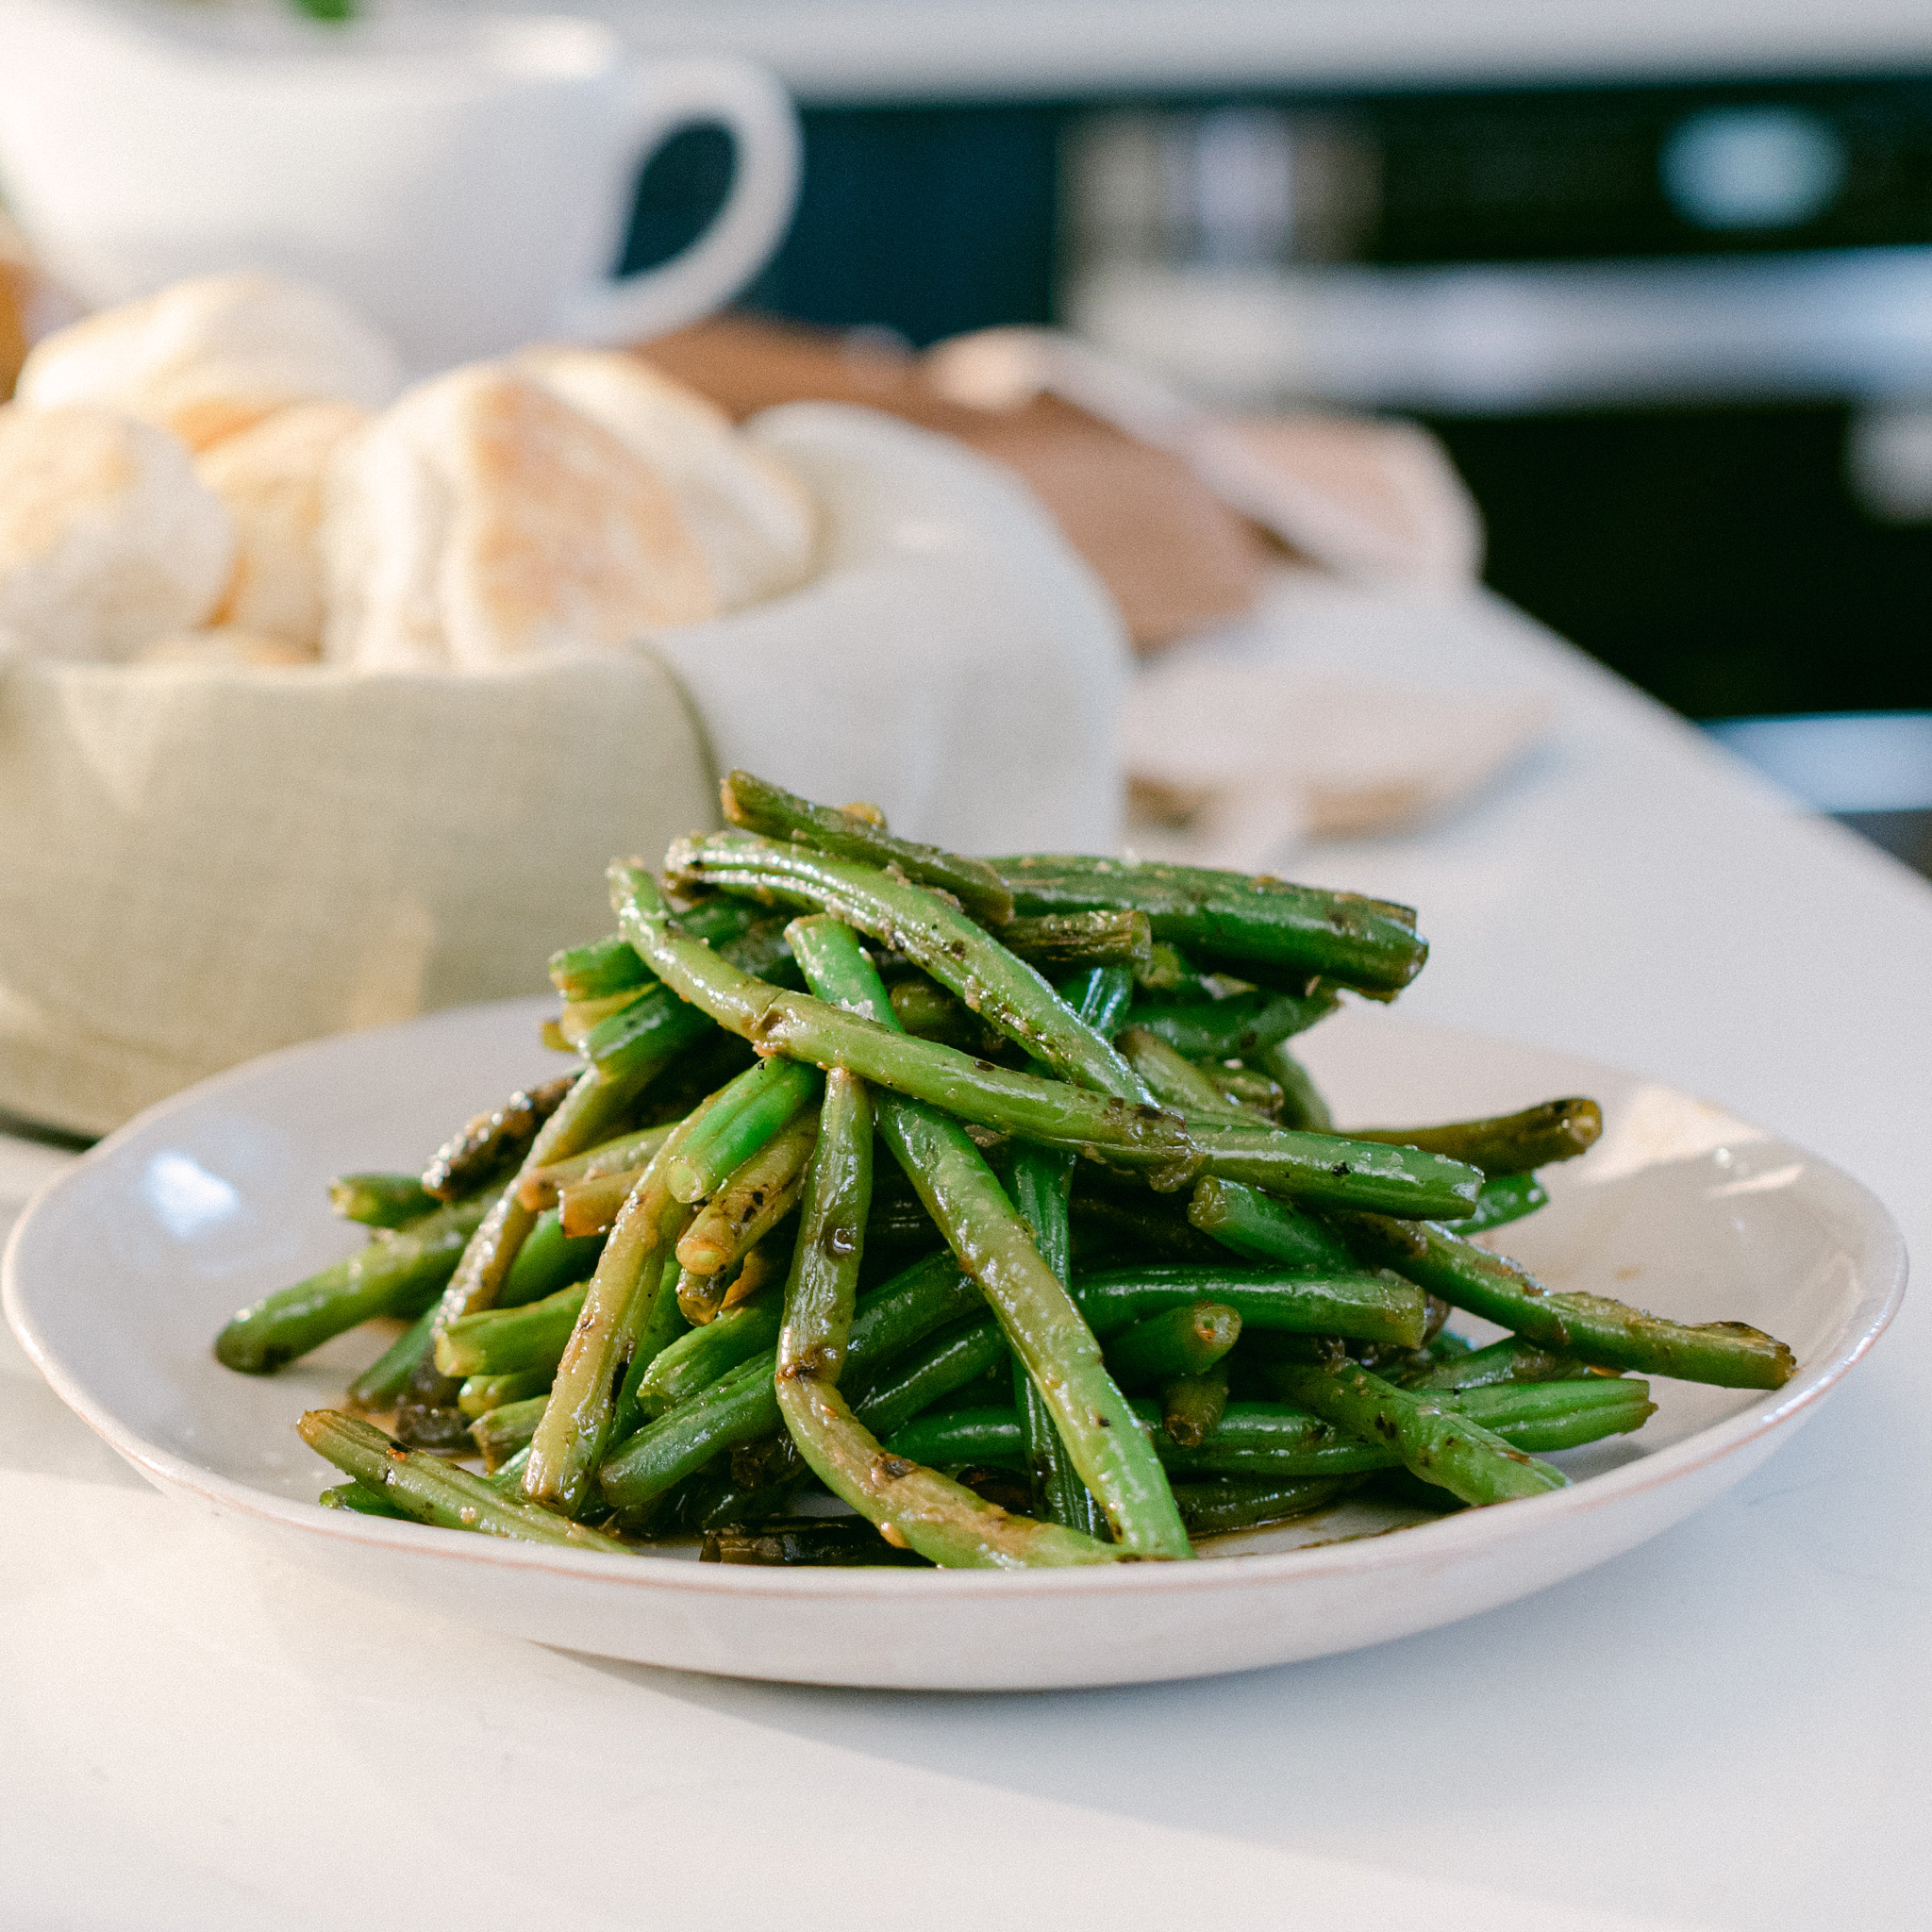 Charles Hunter III's Grilled Green Beans